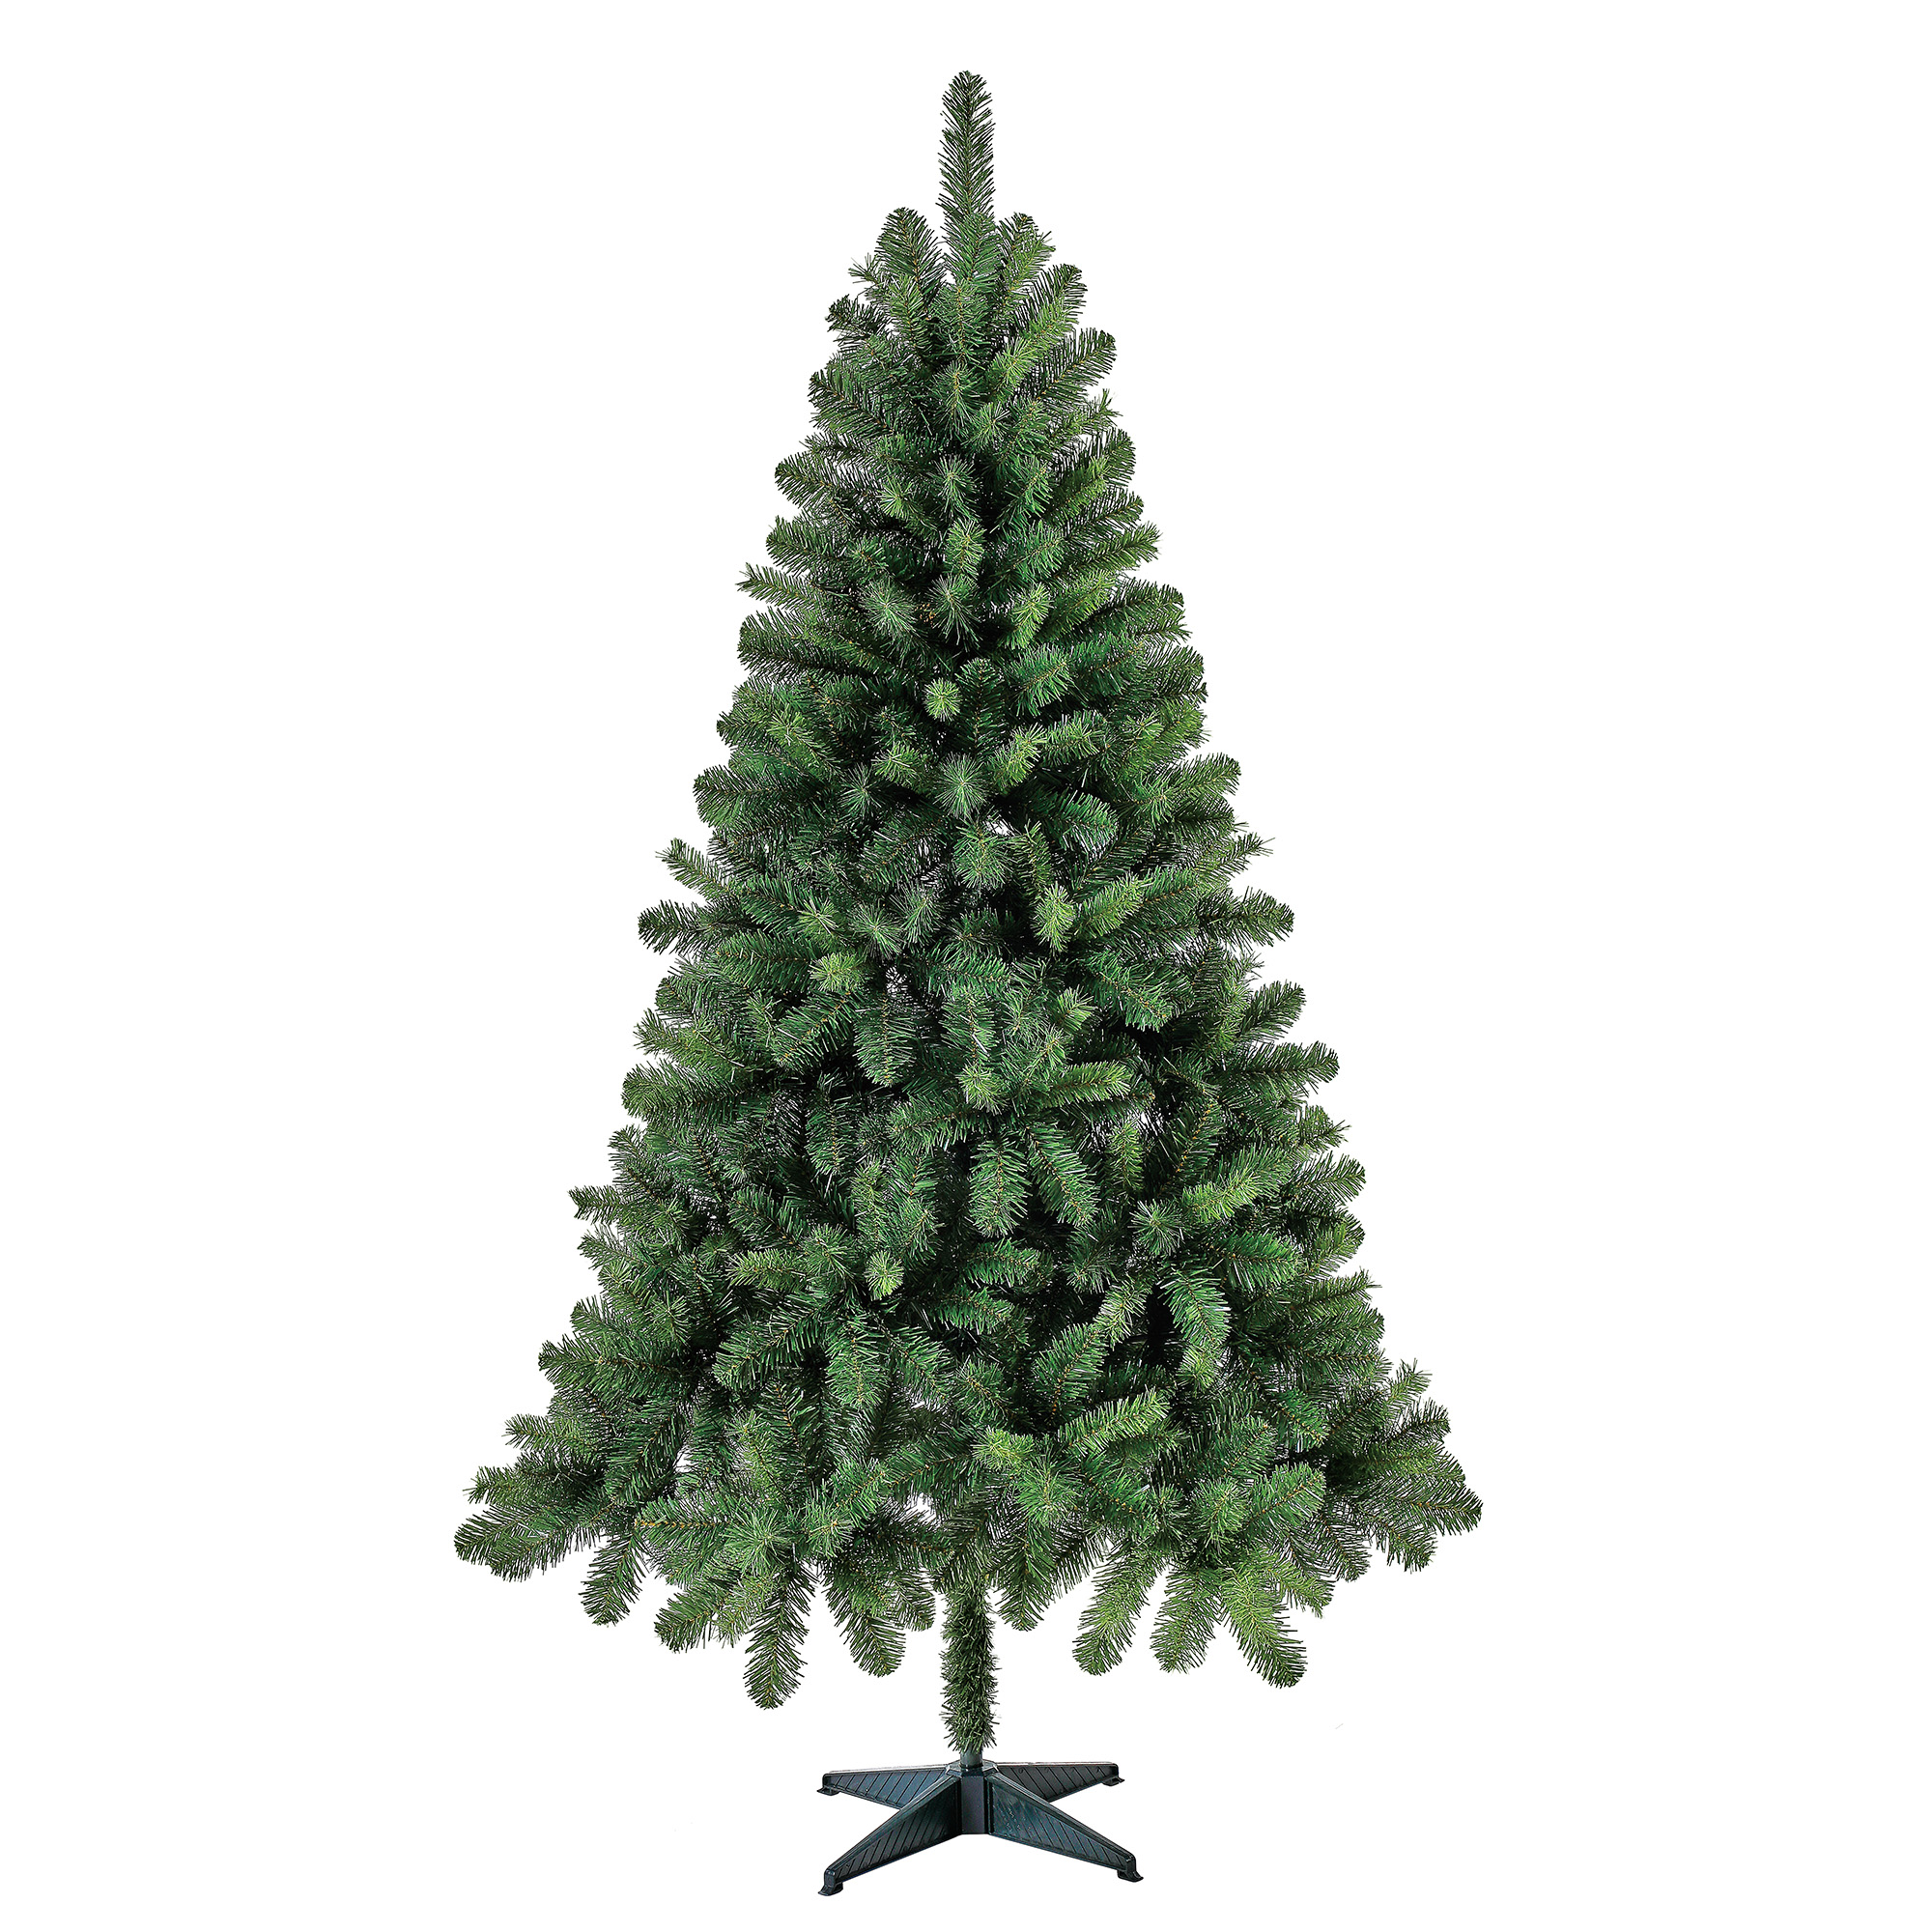 Holiday Time Non-Lit Jackson Spruce Artificial Christmas Tree, 6.5' - image 1 of 6